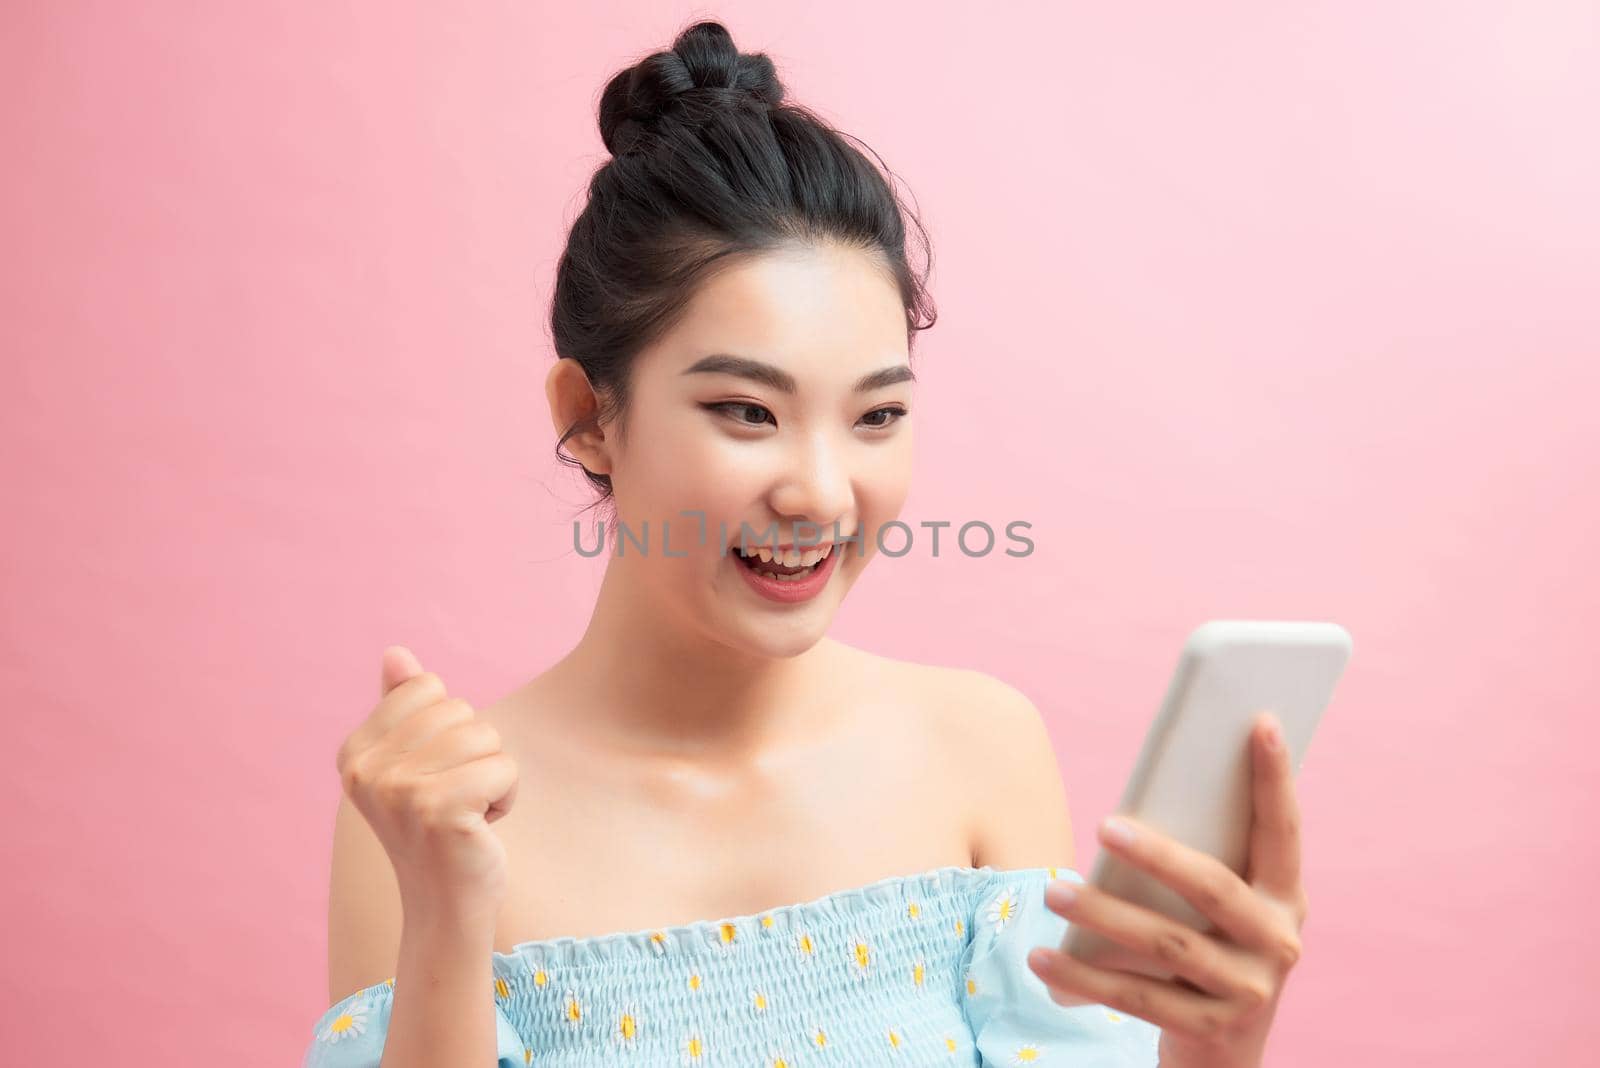 Close-up portrait of beautiful screaming young girl holding smartphone showing winner gesture, isolated on pink background by makidotvn